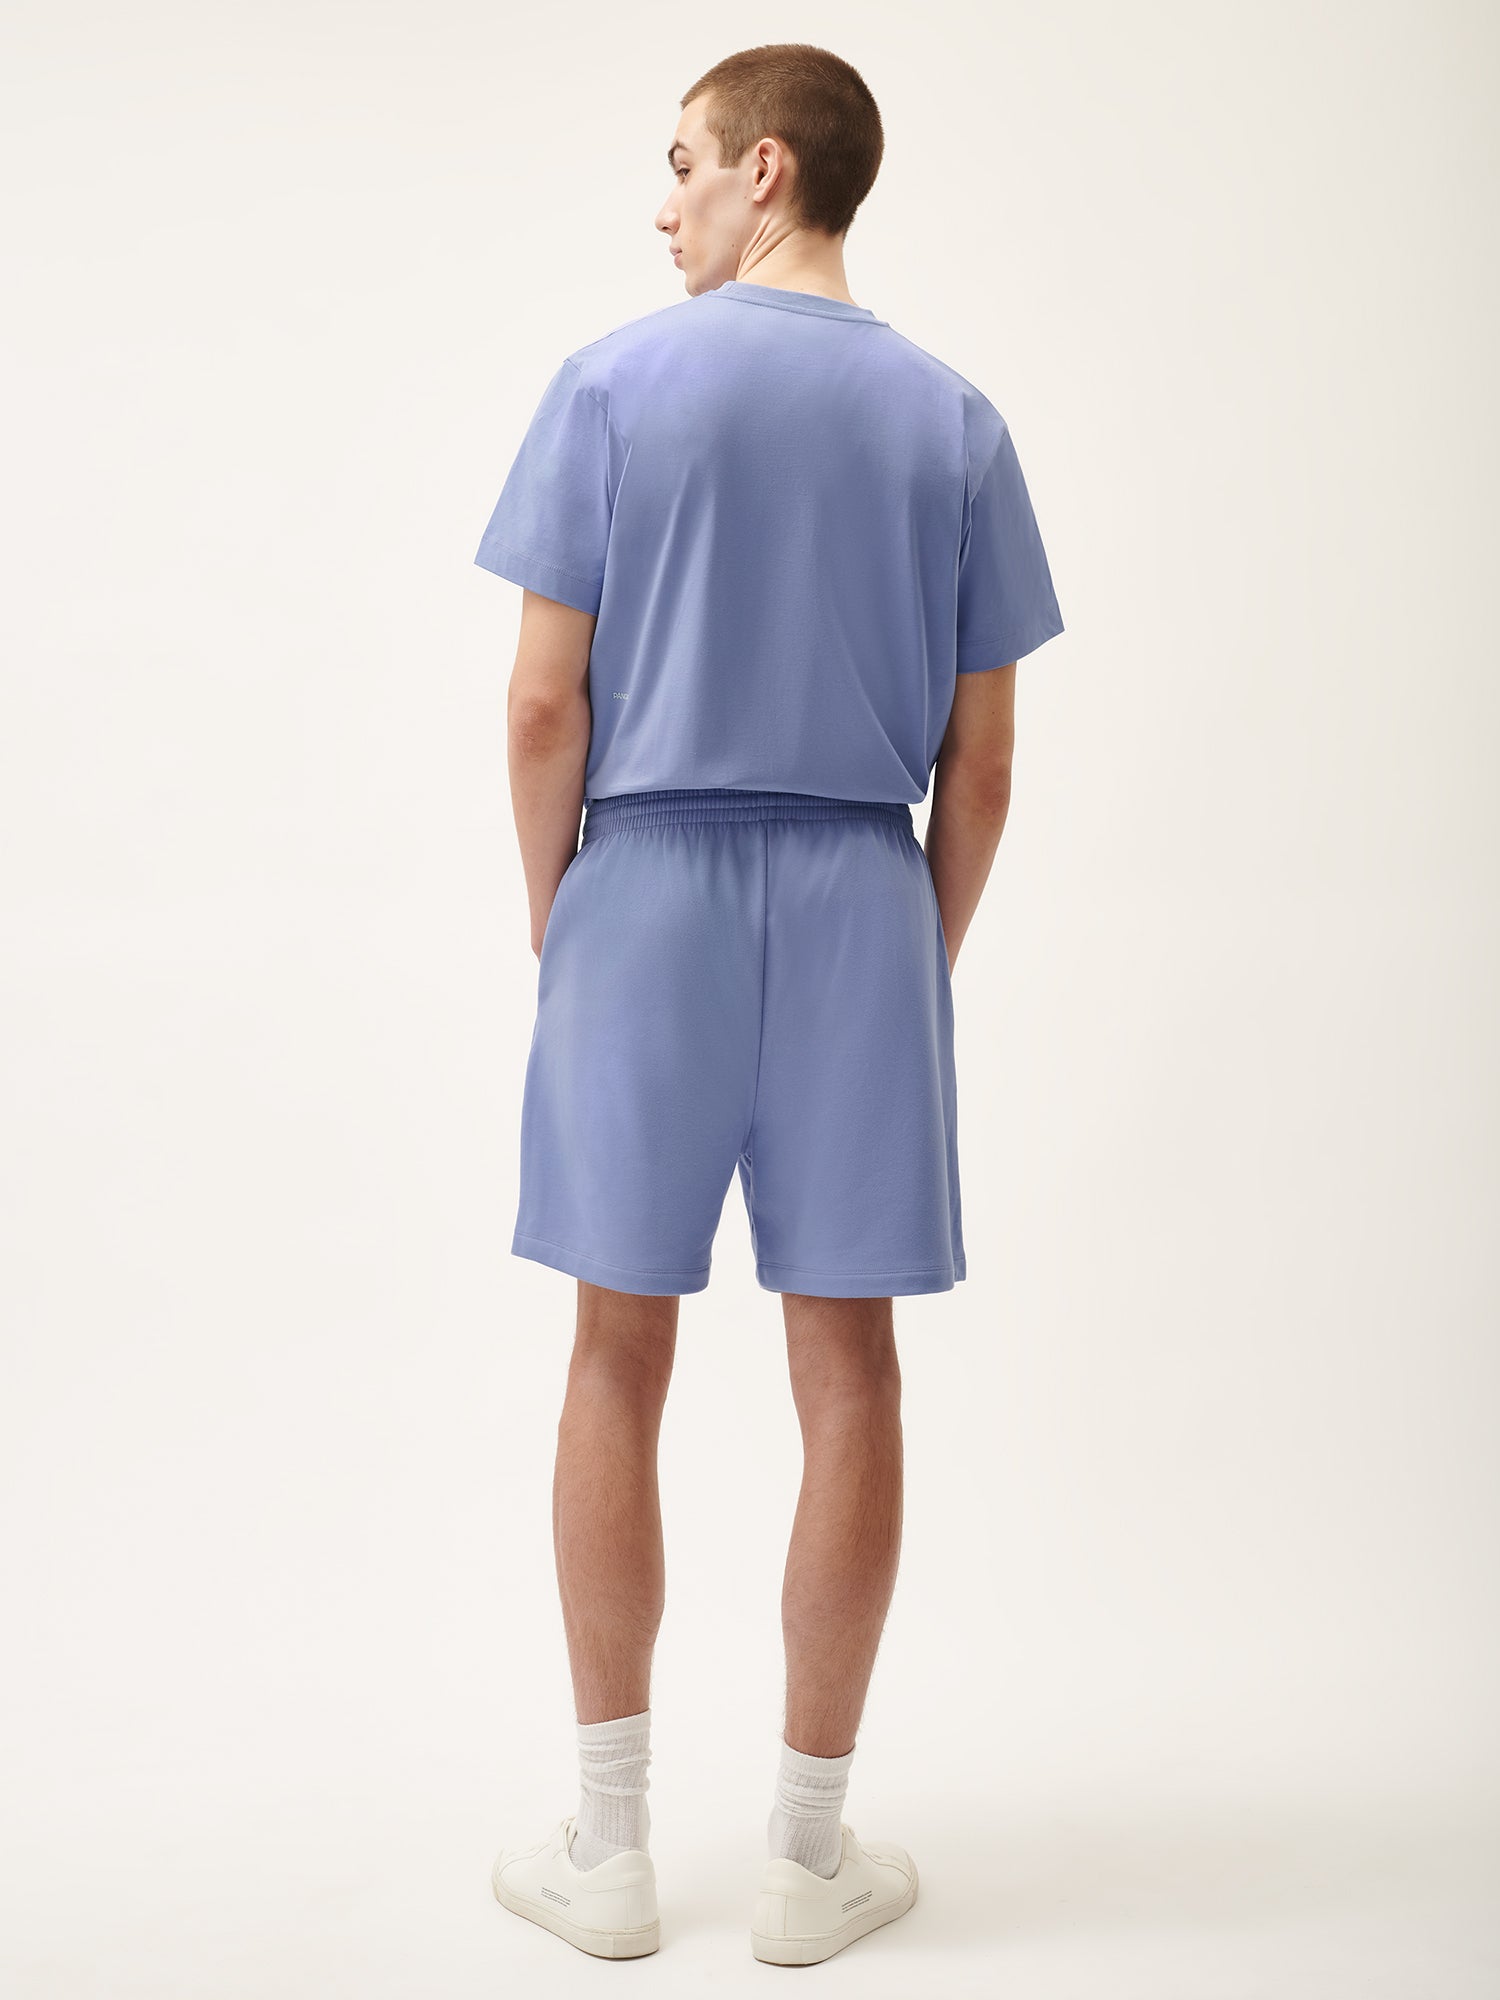 365_Summer_Refresh_Midweight_Mid_Length_Shorts_Aster_Purple_Male-2